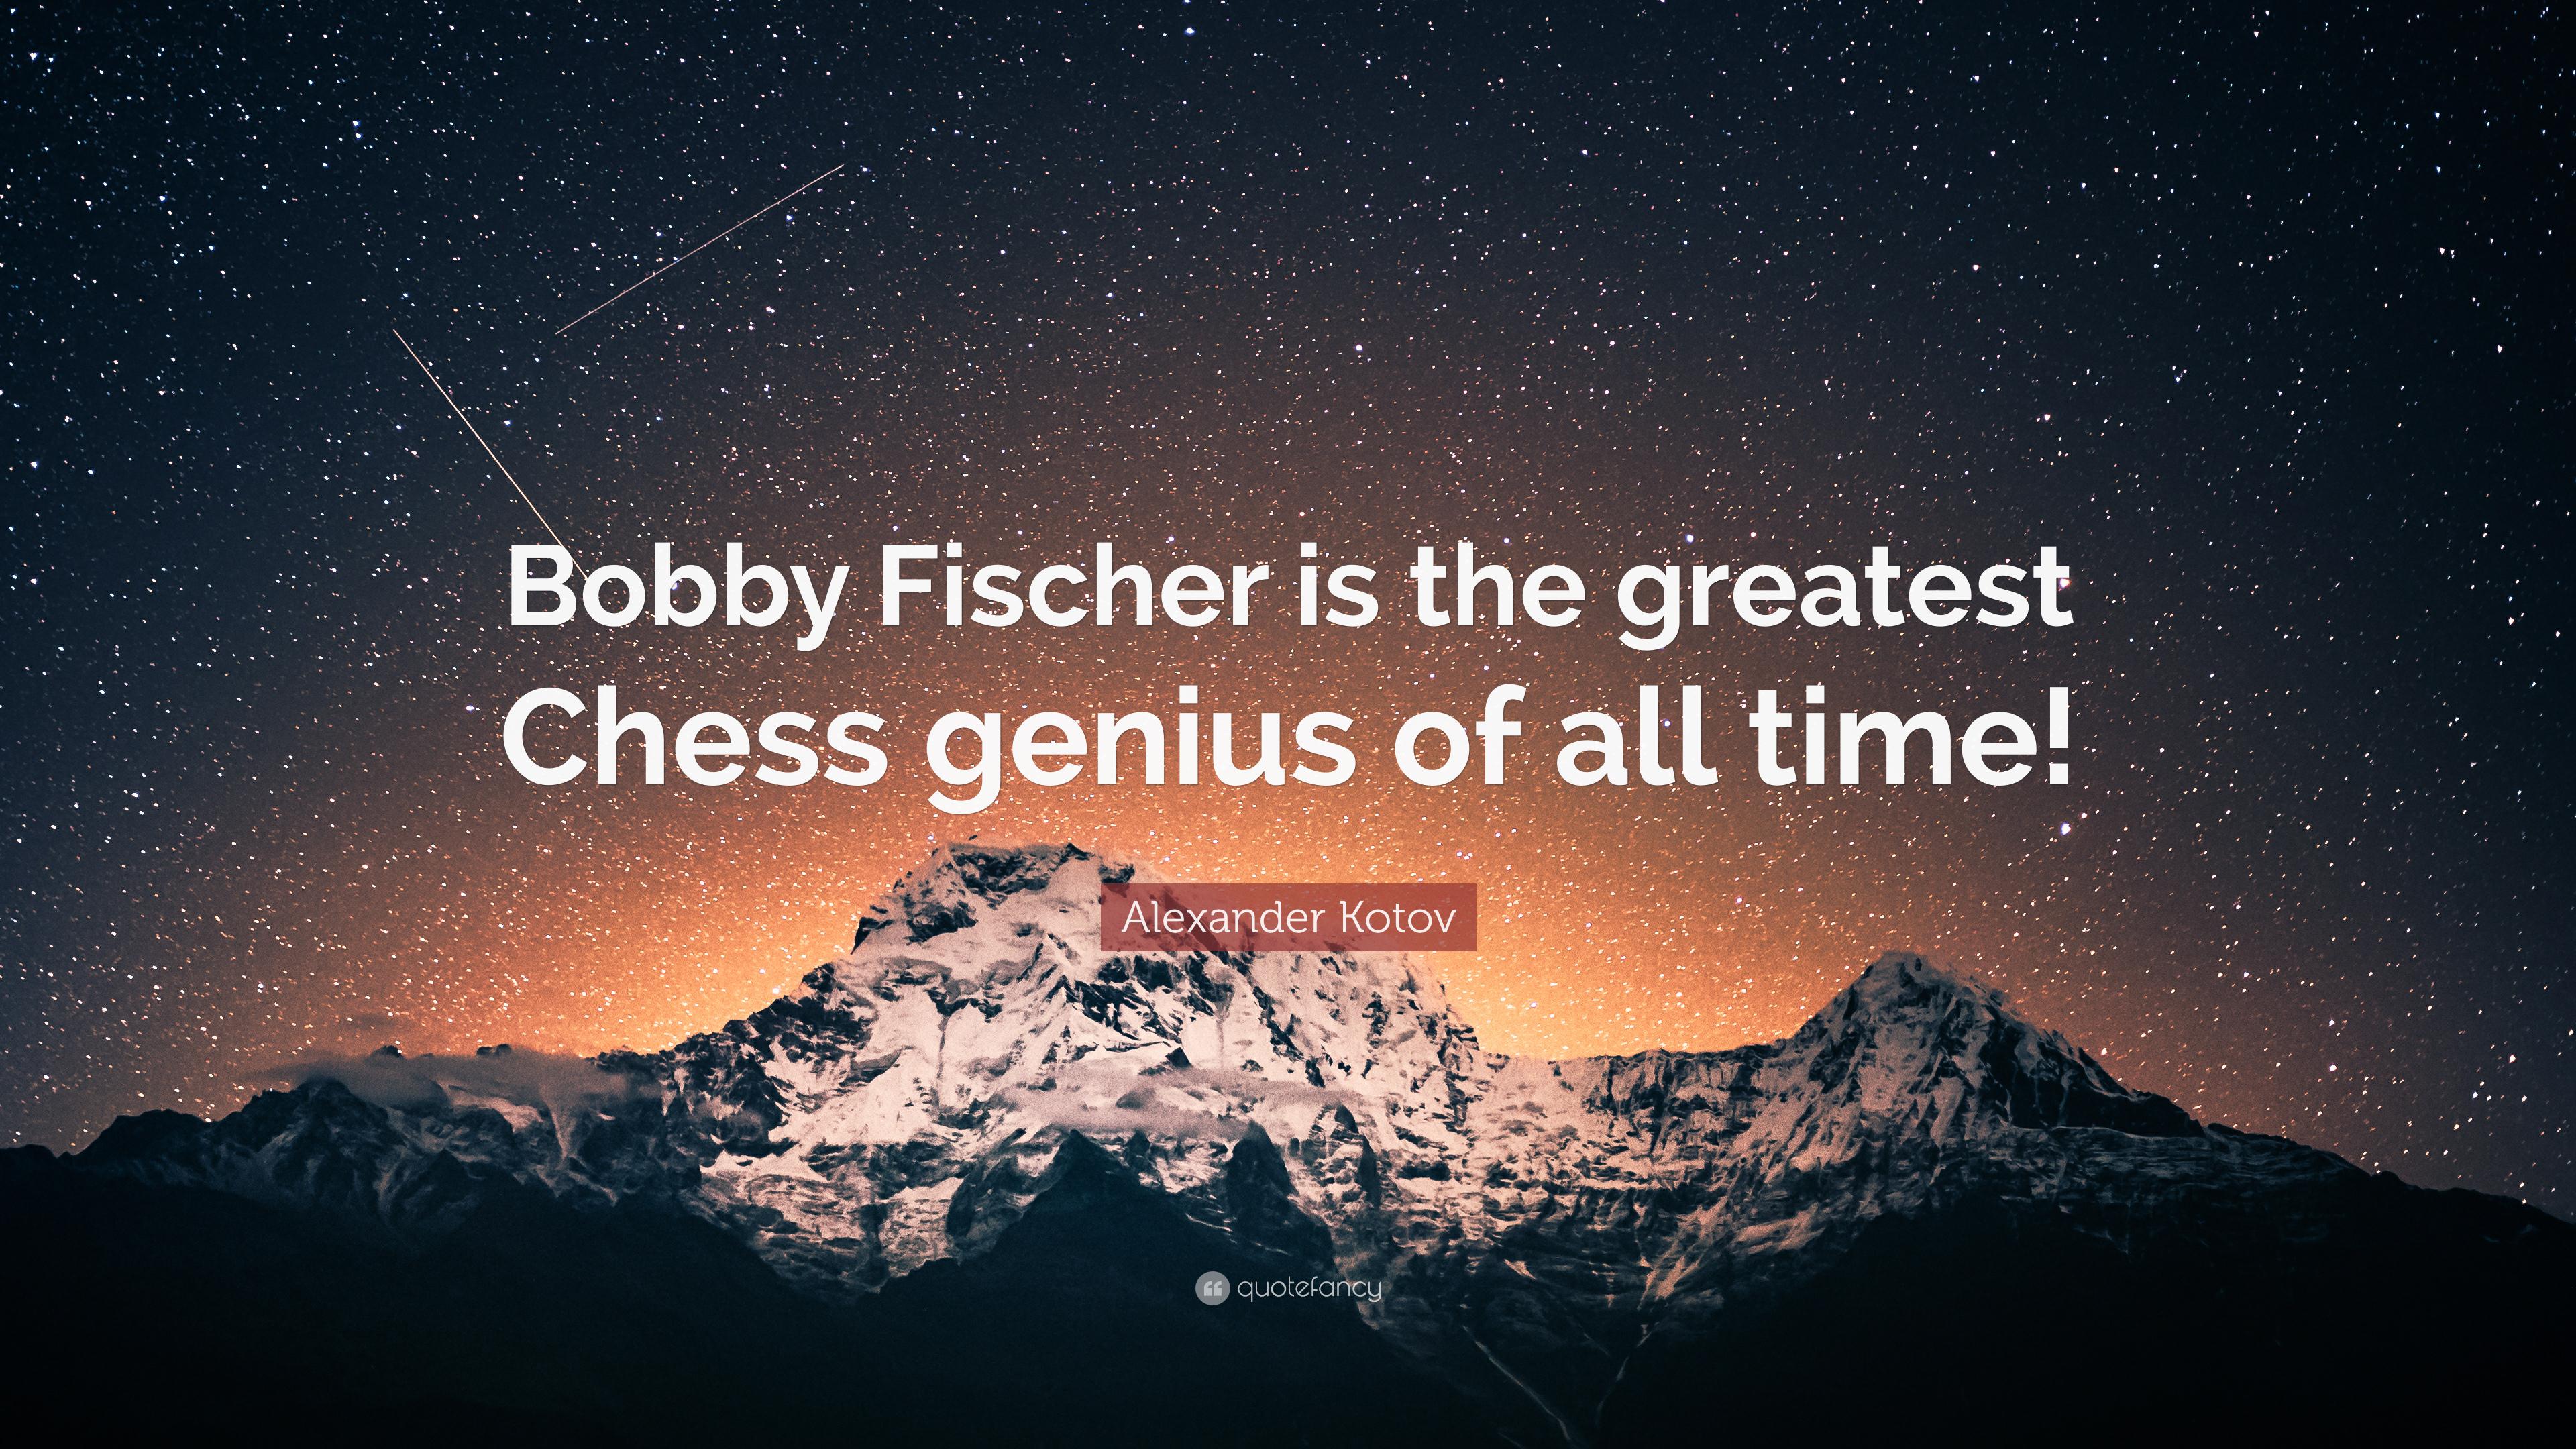 Alexander Kotov Quote: “Bobby Fischer is the greatest Chess